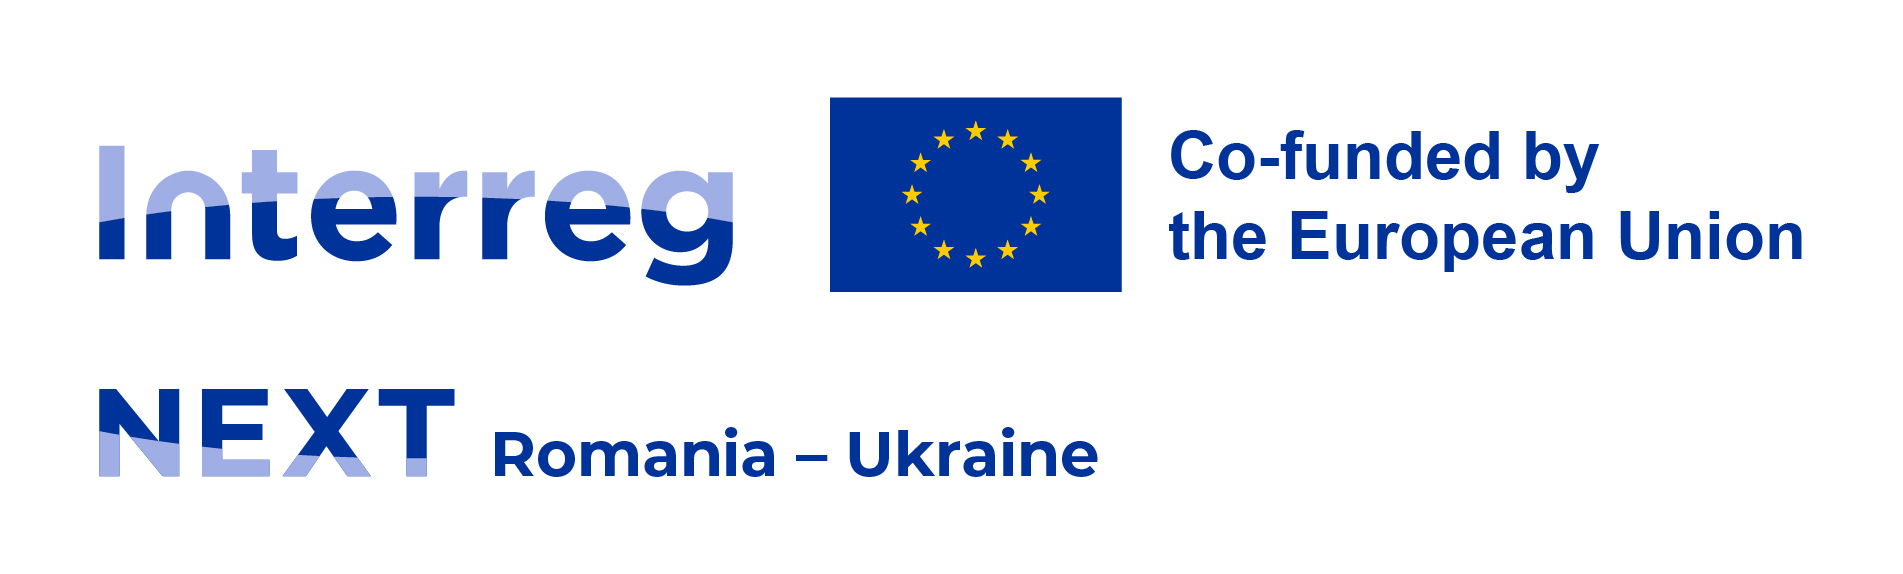 The final draft of Interreg NEXT Romania-Ukraine Programme was approved by the Joint Programming Committee